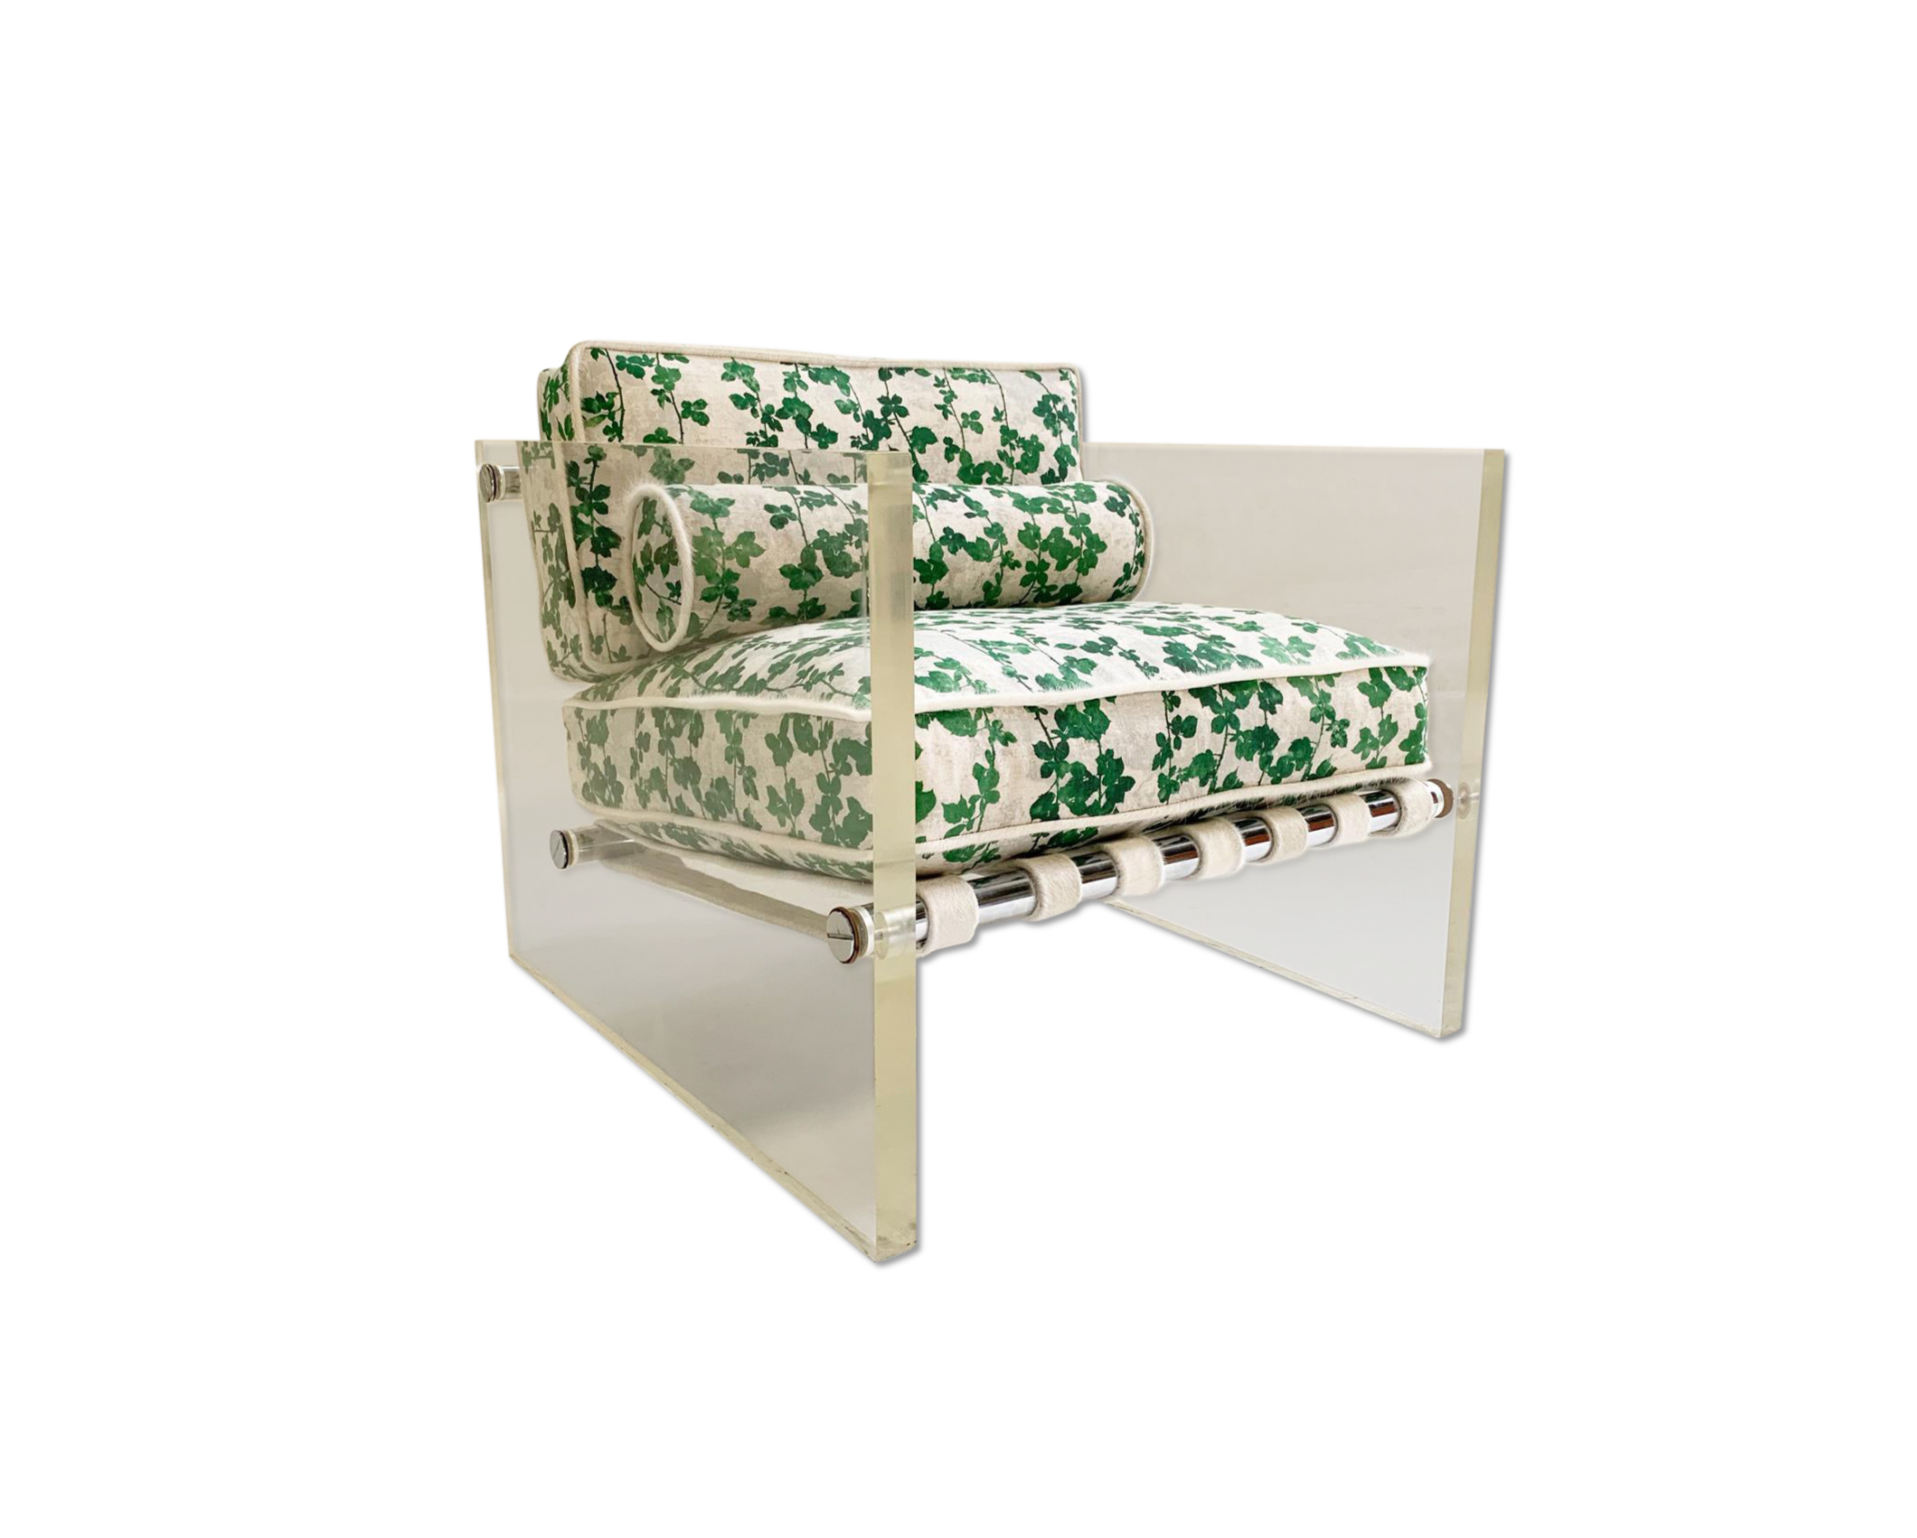 Lucite Slab Lounge Chair in "Brambles" - FORSYTH